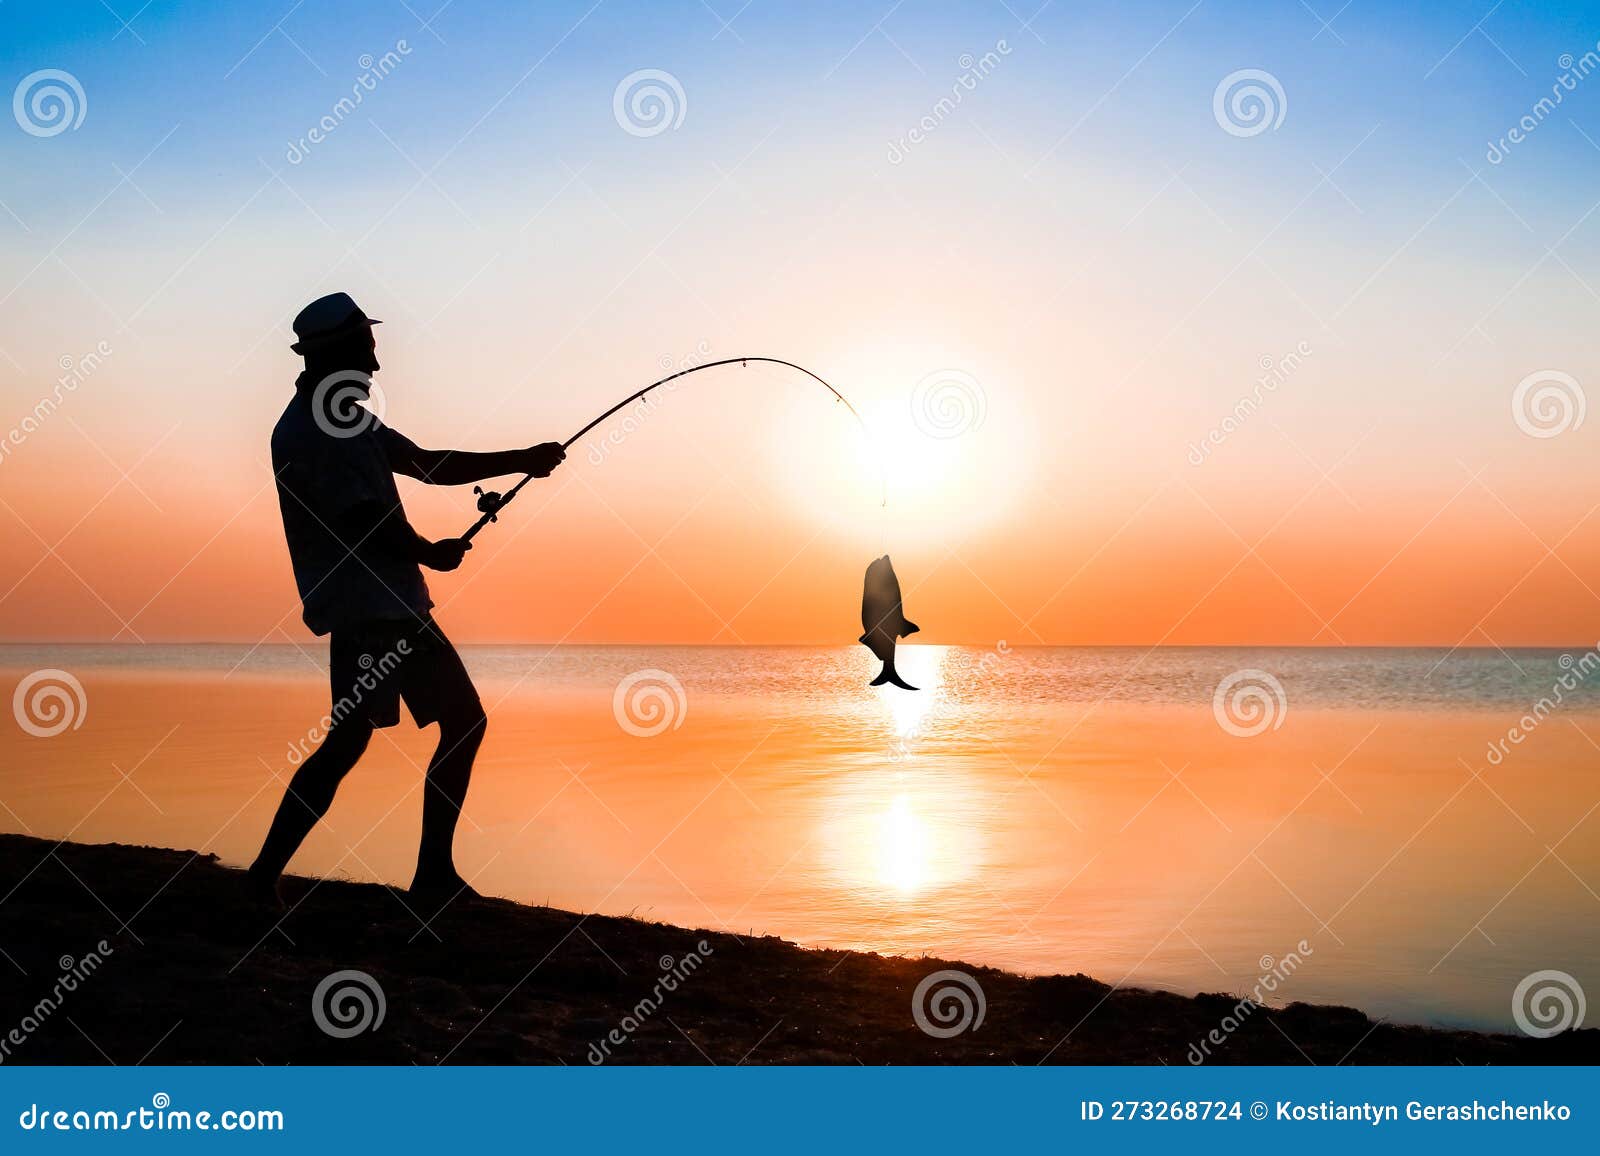 A Happy Guy Fisherman Catching Fish by the Sea on Nature Silhouette Travel  Stock Photo - Image of morning, leisure: 273268724